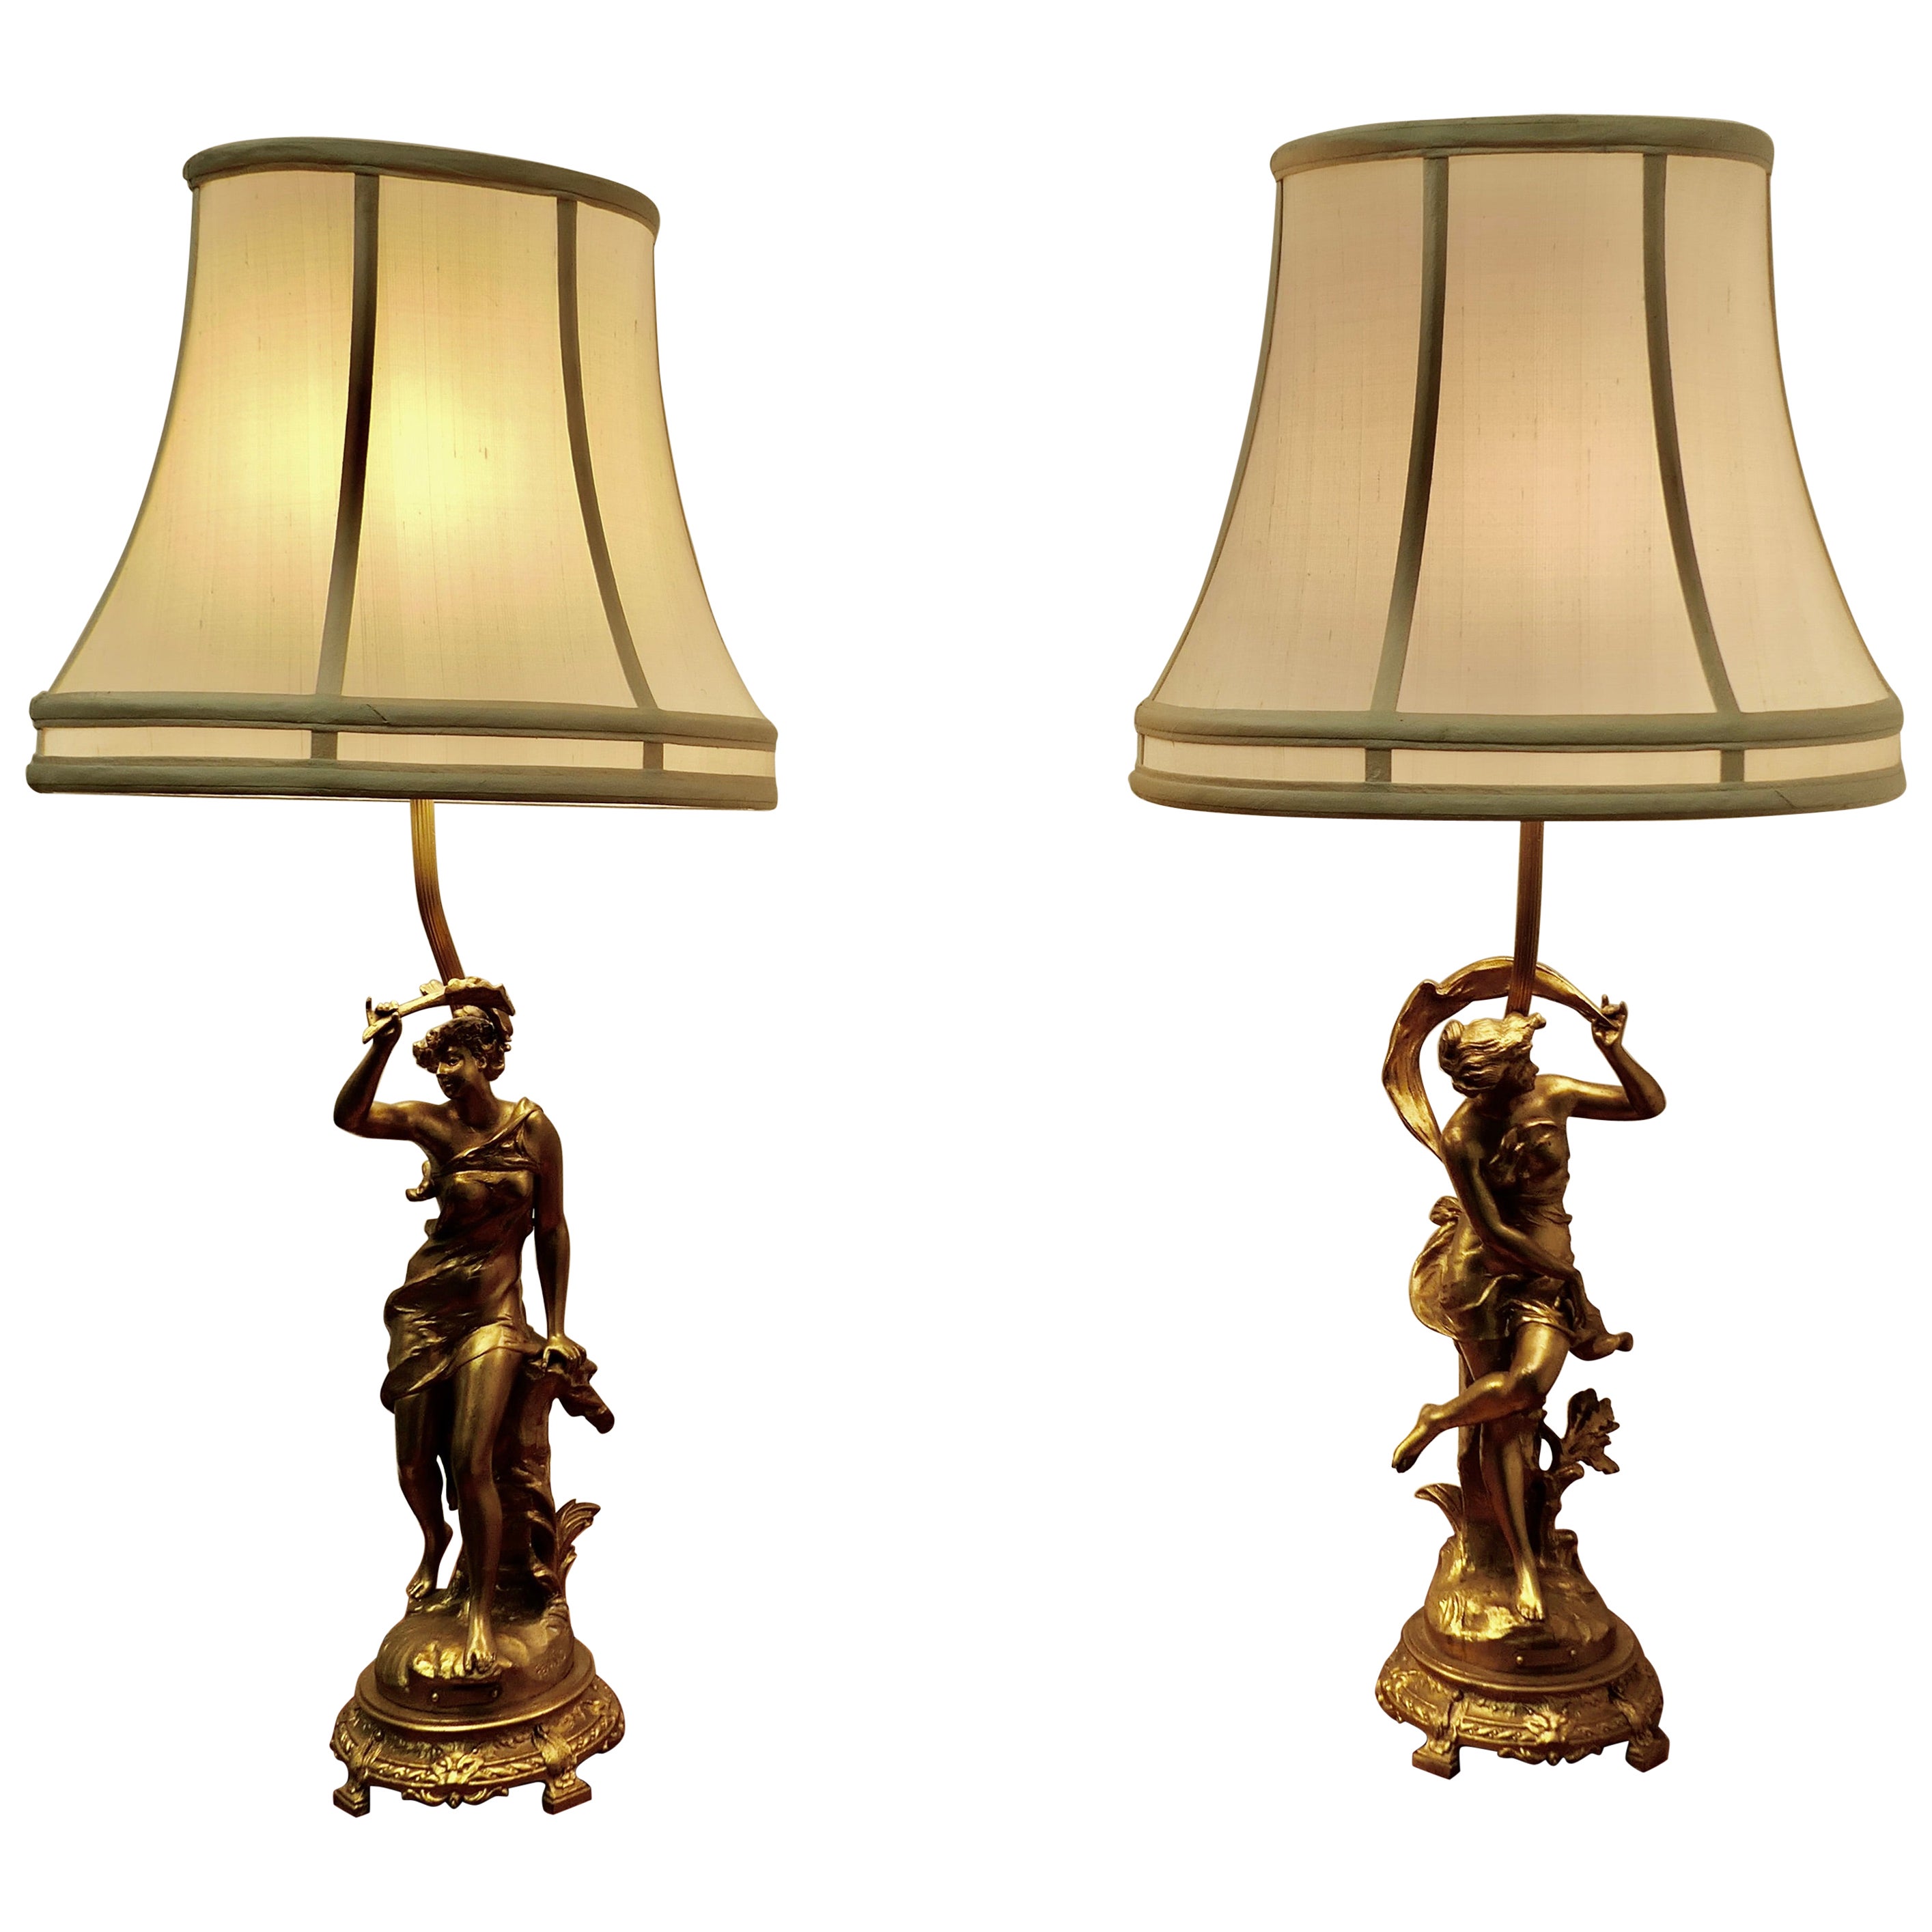 A Pair of French Figural Brass Lamps, after Ernest Justin Ferrand  A Pair of Fre